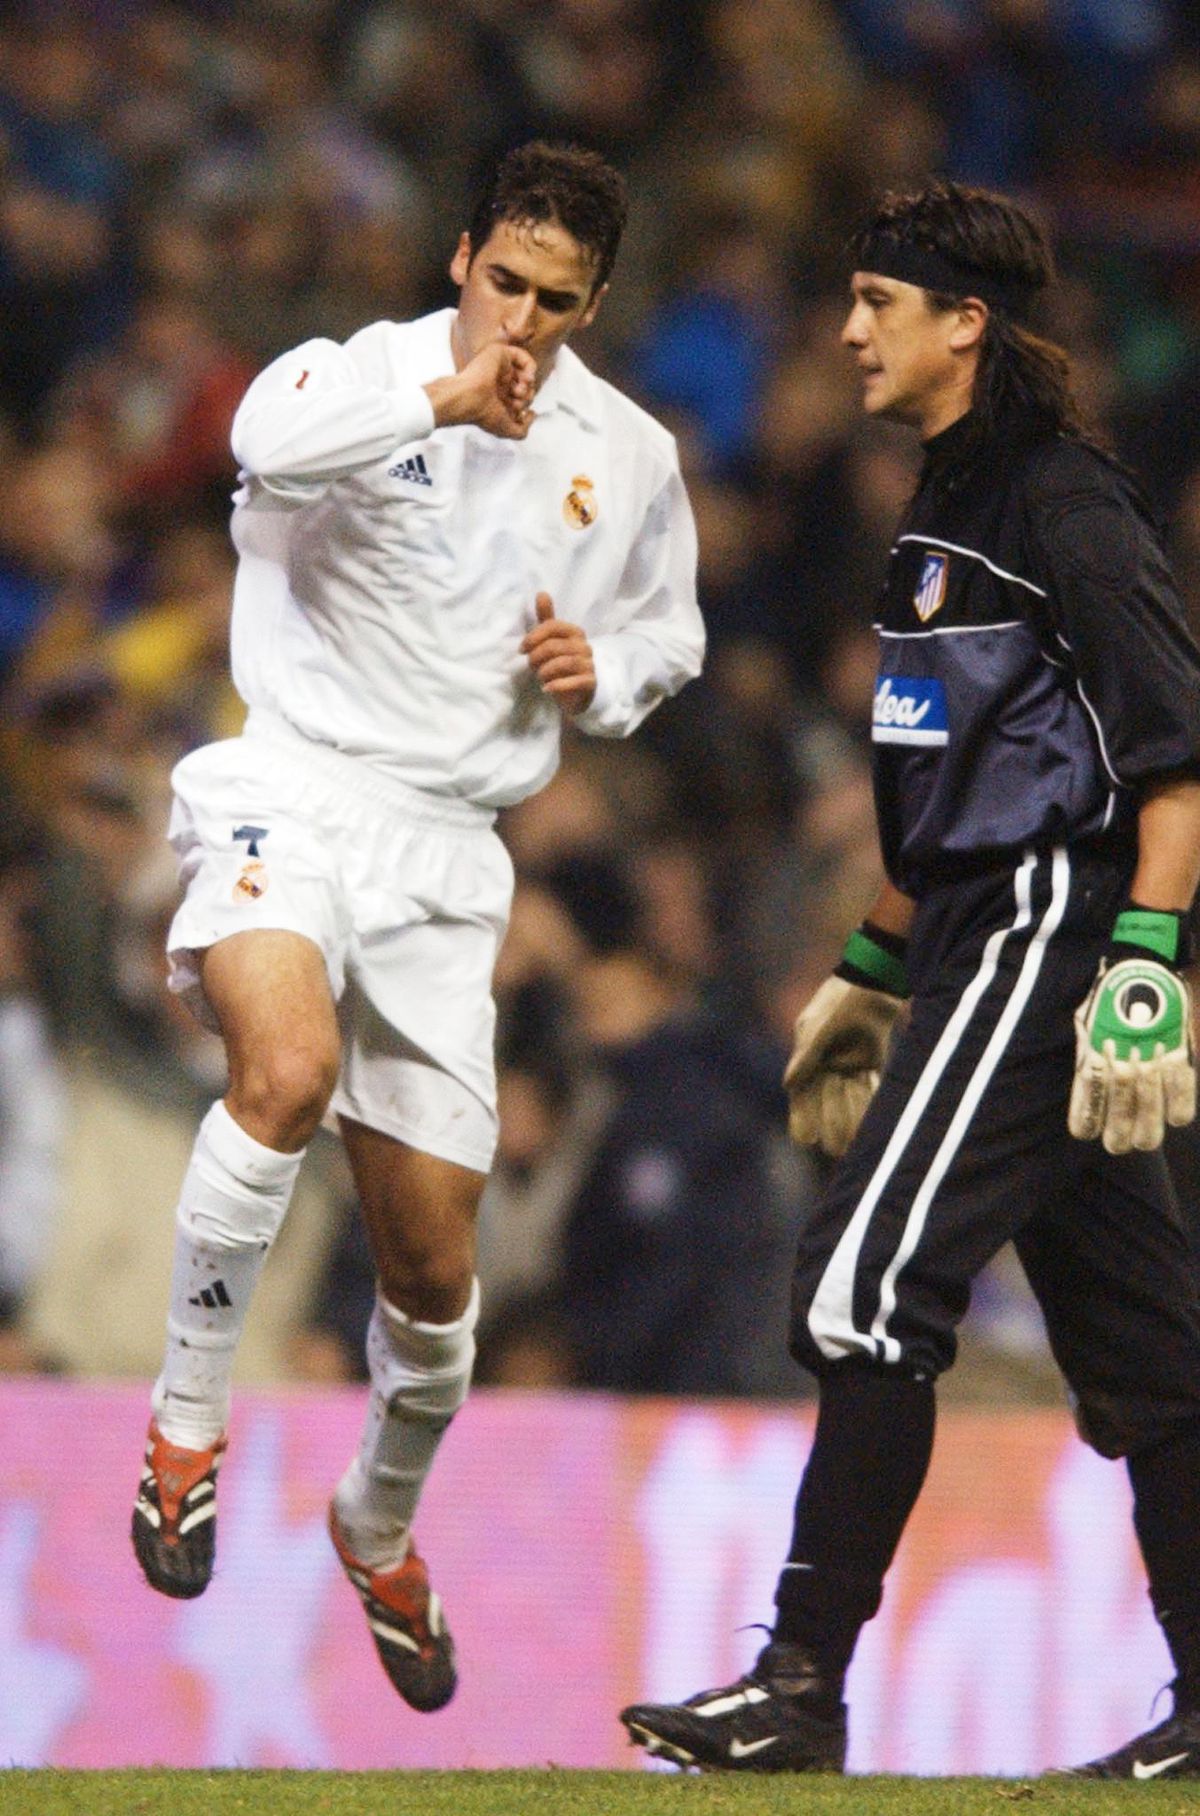 Raul (L) from Real Madrid celebrates his goal agai